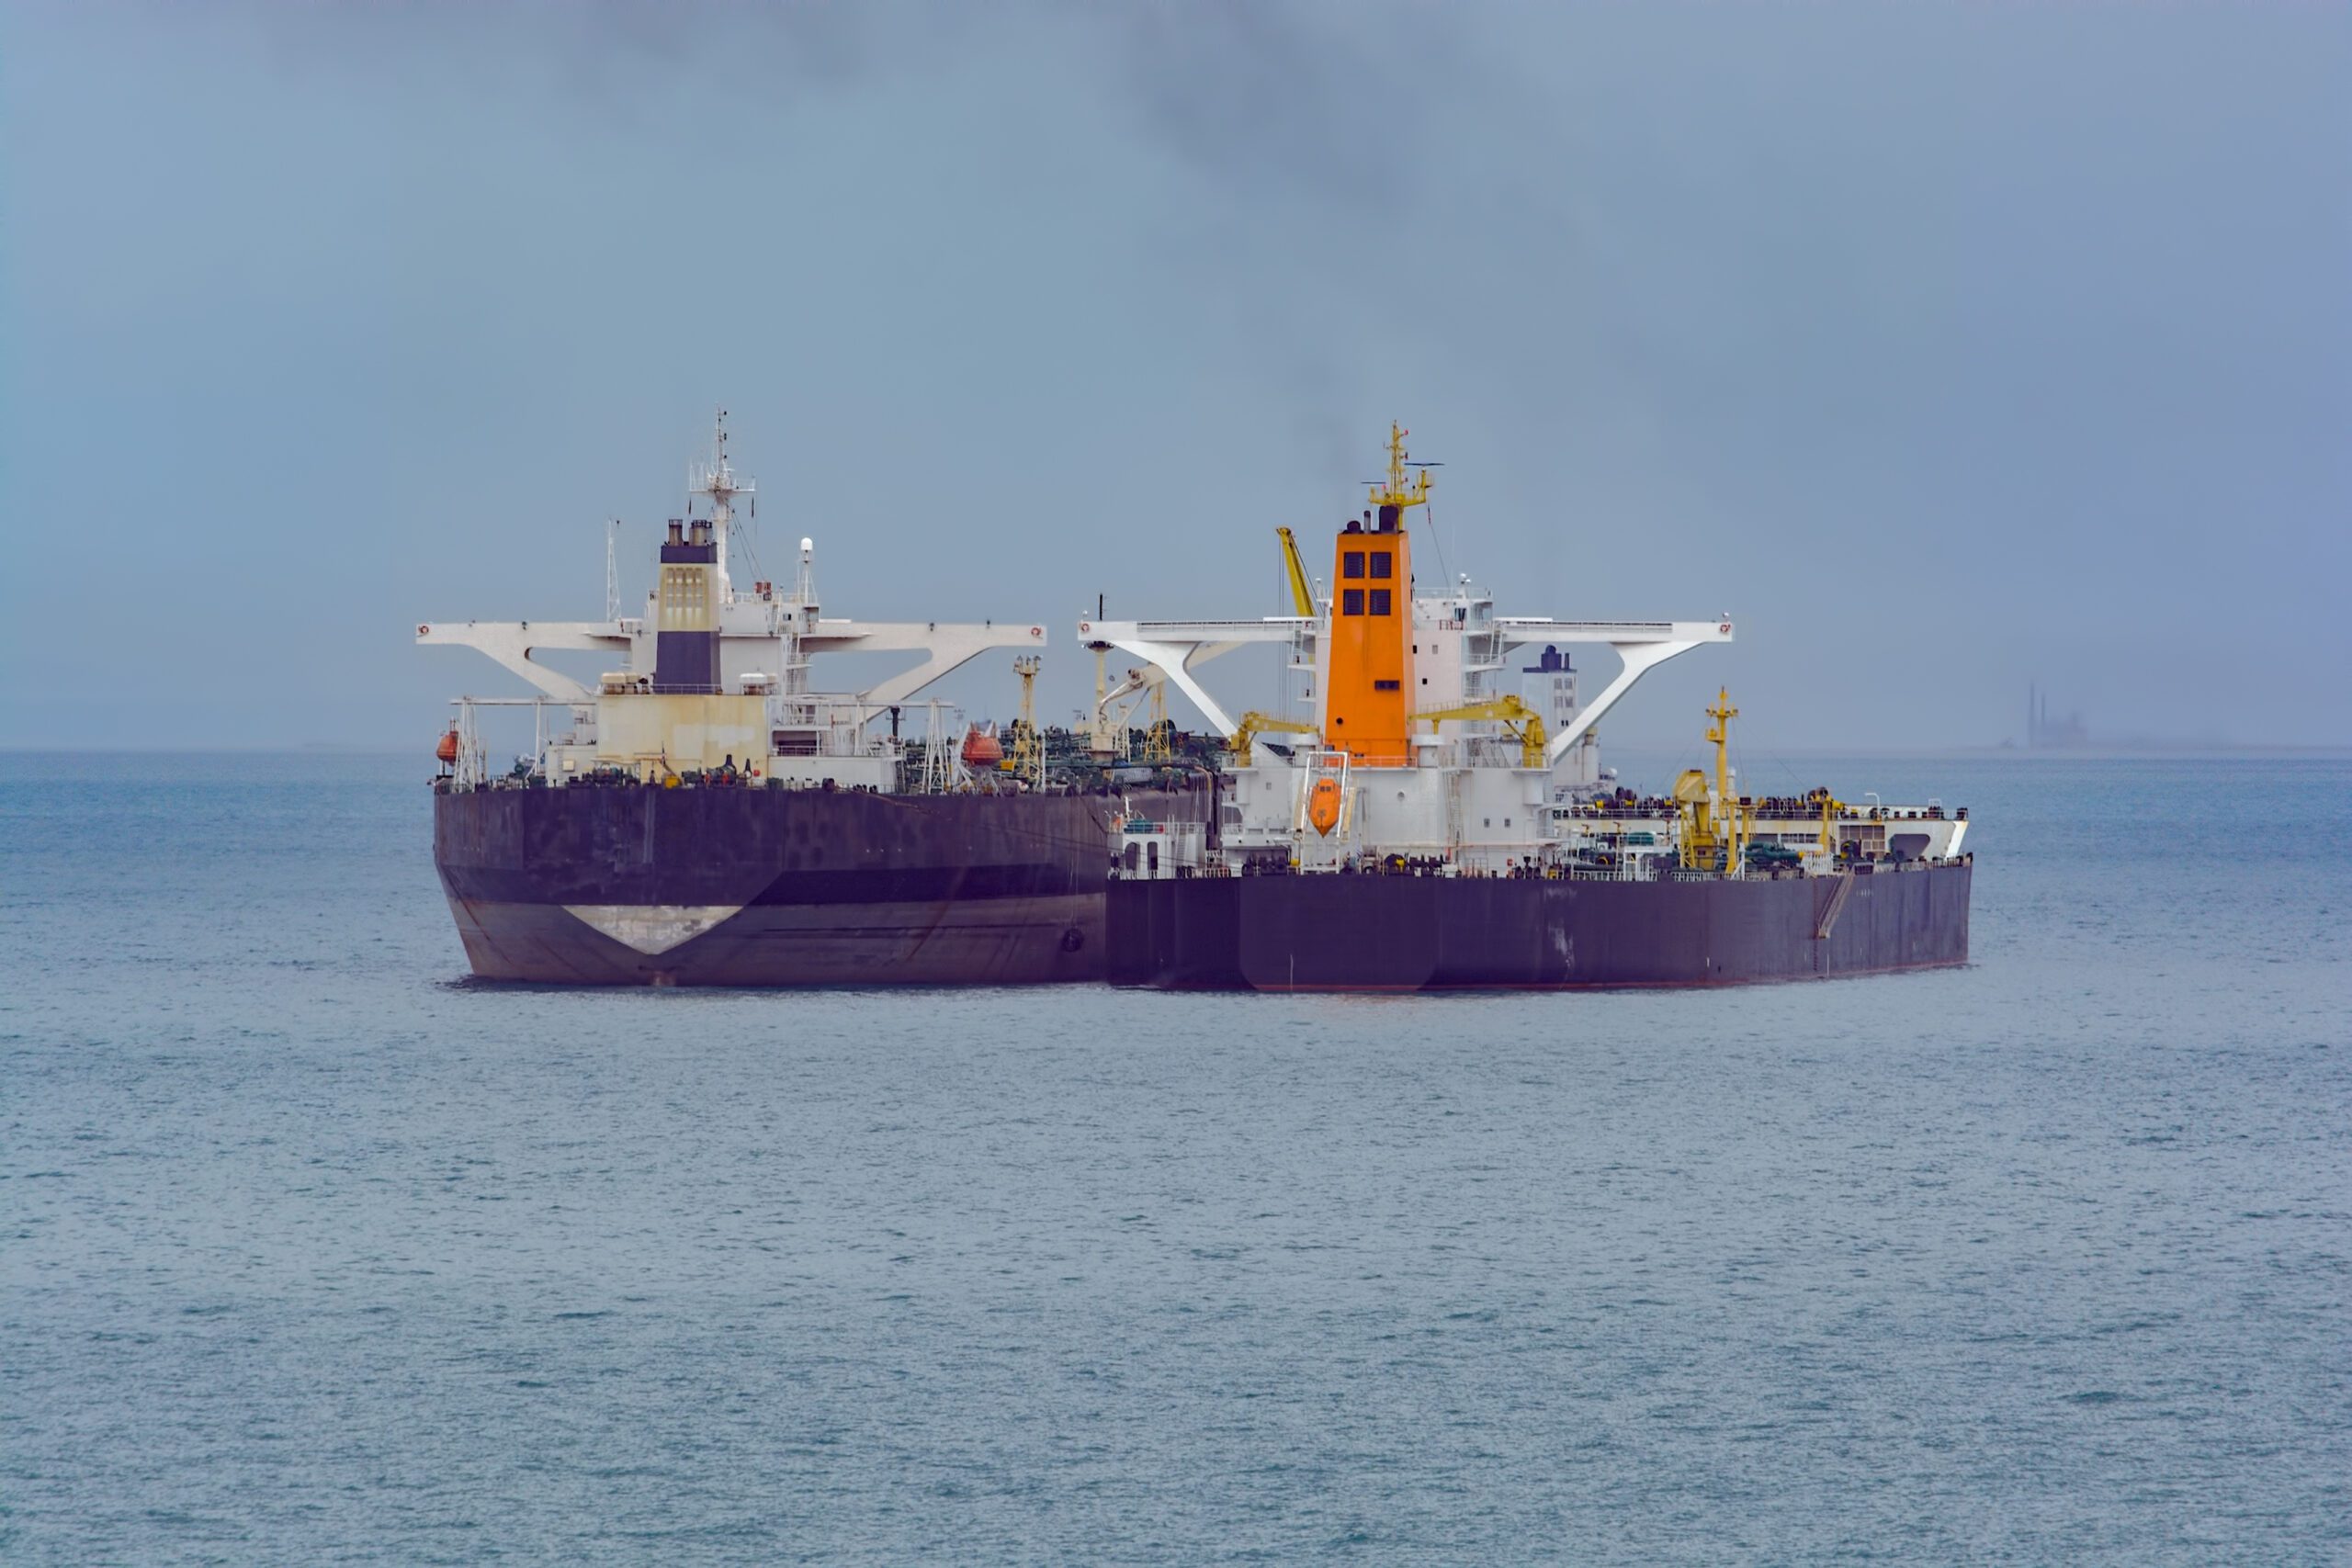 Loading anchored oil supertanker via a ship-to-ship oil transfer Refuelling or bunkering in marine terms is carried out using a small raid tanker to pump the bunker fuel into the bigger ship via a ship-to-ship oil transfer (STS).